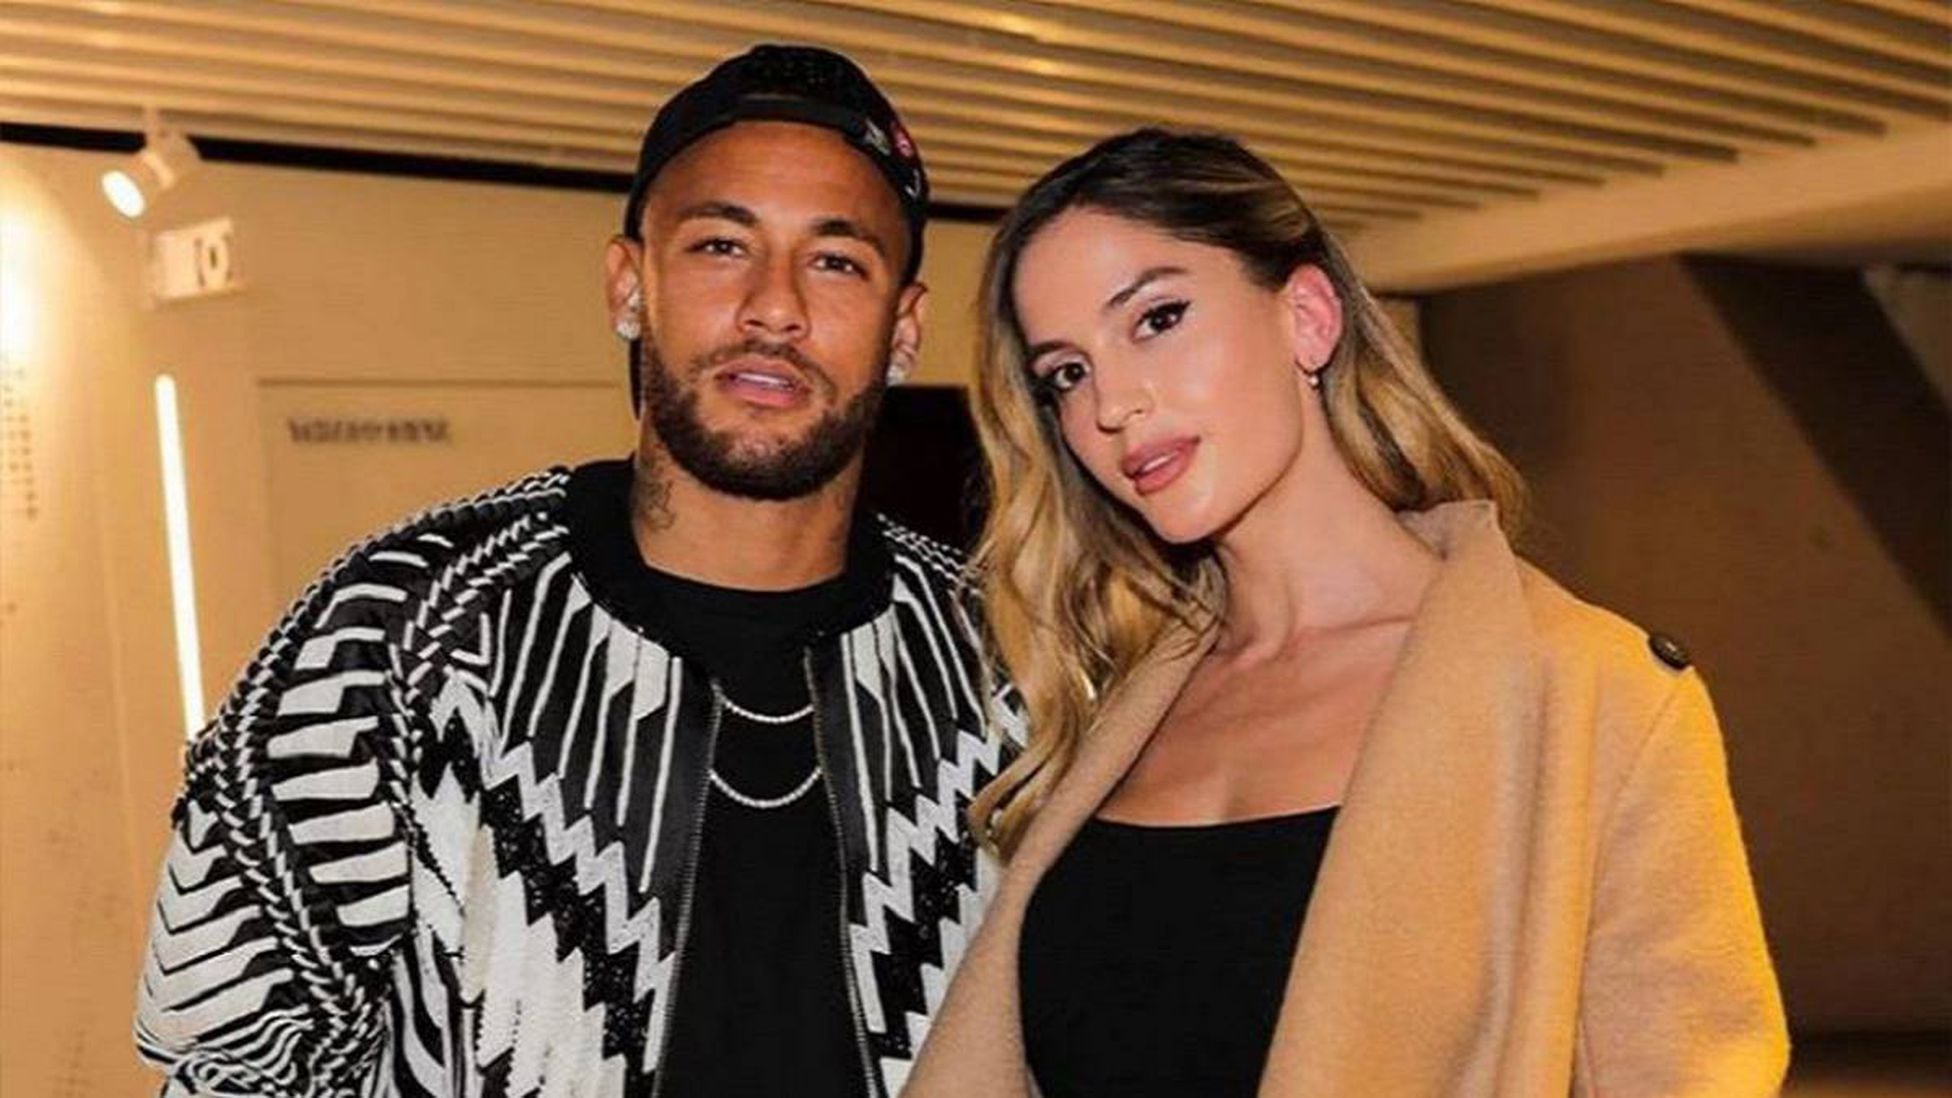 Neymar and Natalia Barulich: clues point to romance between model and PSG star - AS USA